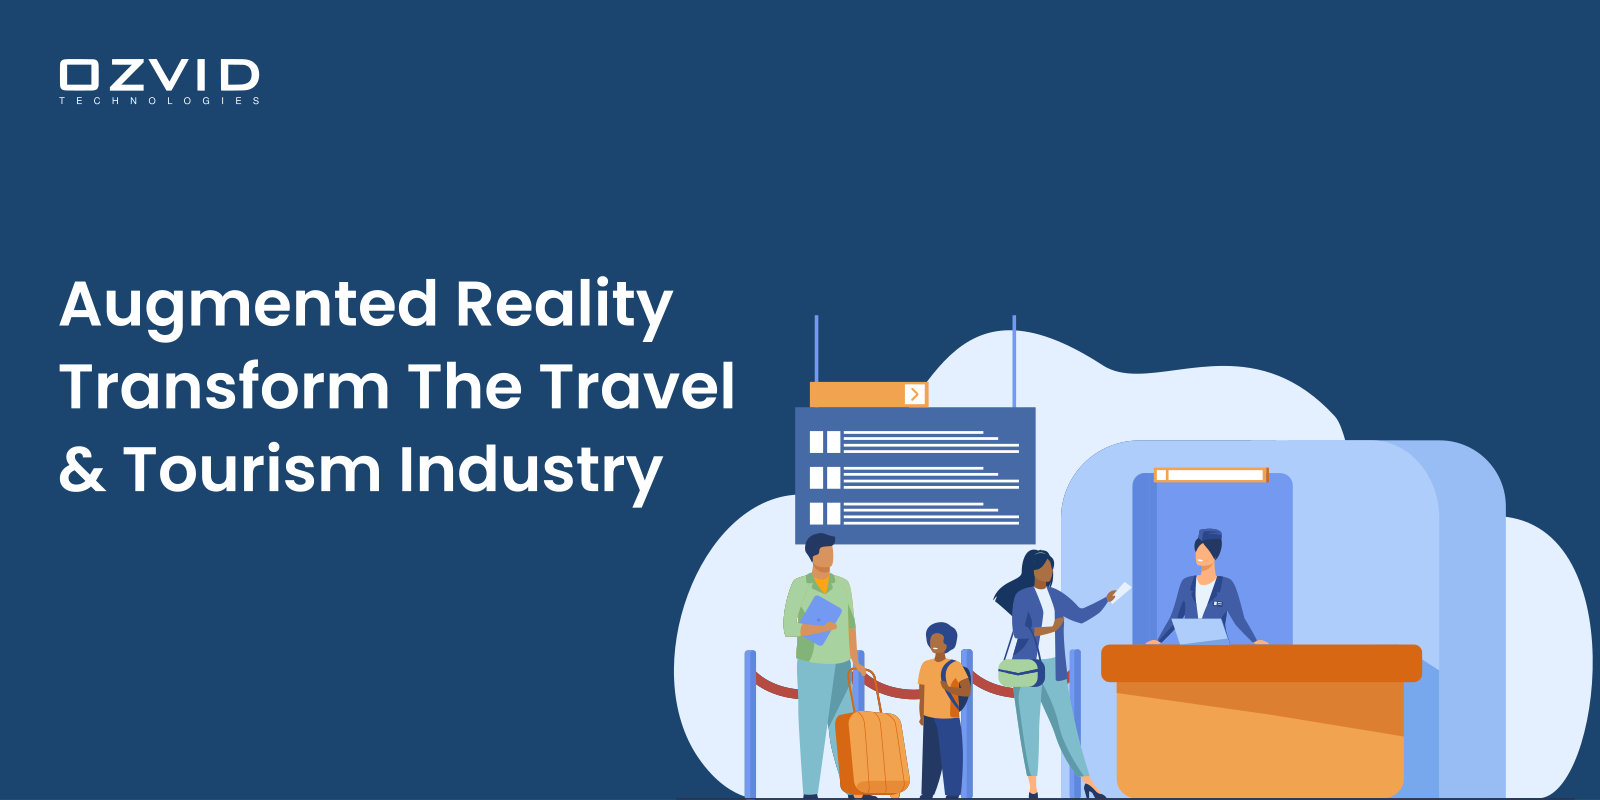 How Does Augmented Reality Transform The Travel And Tourism Industry?